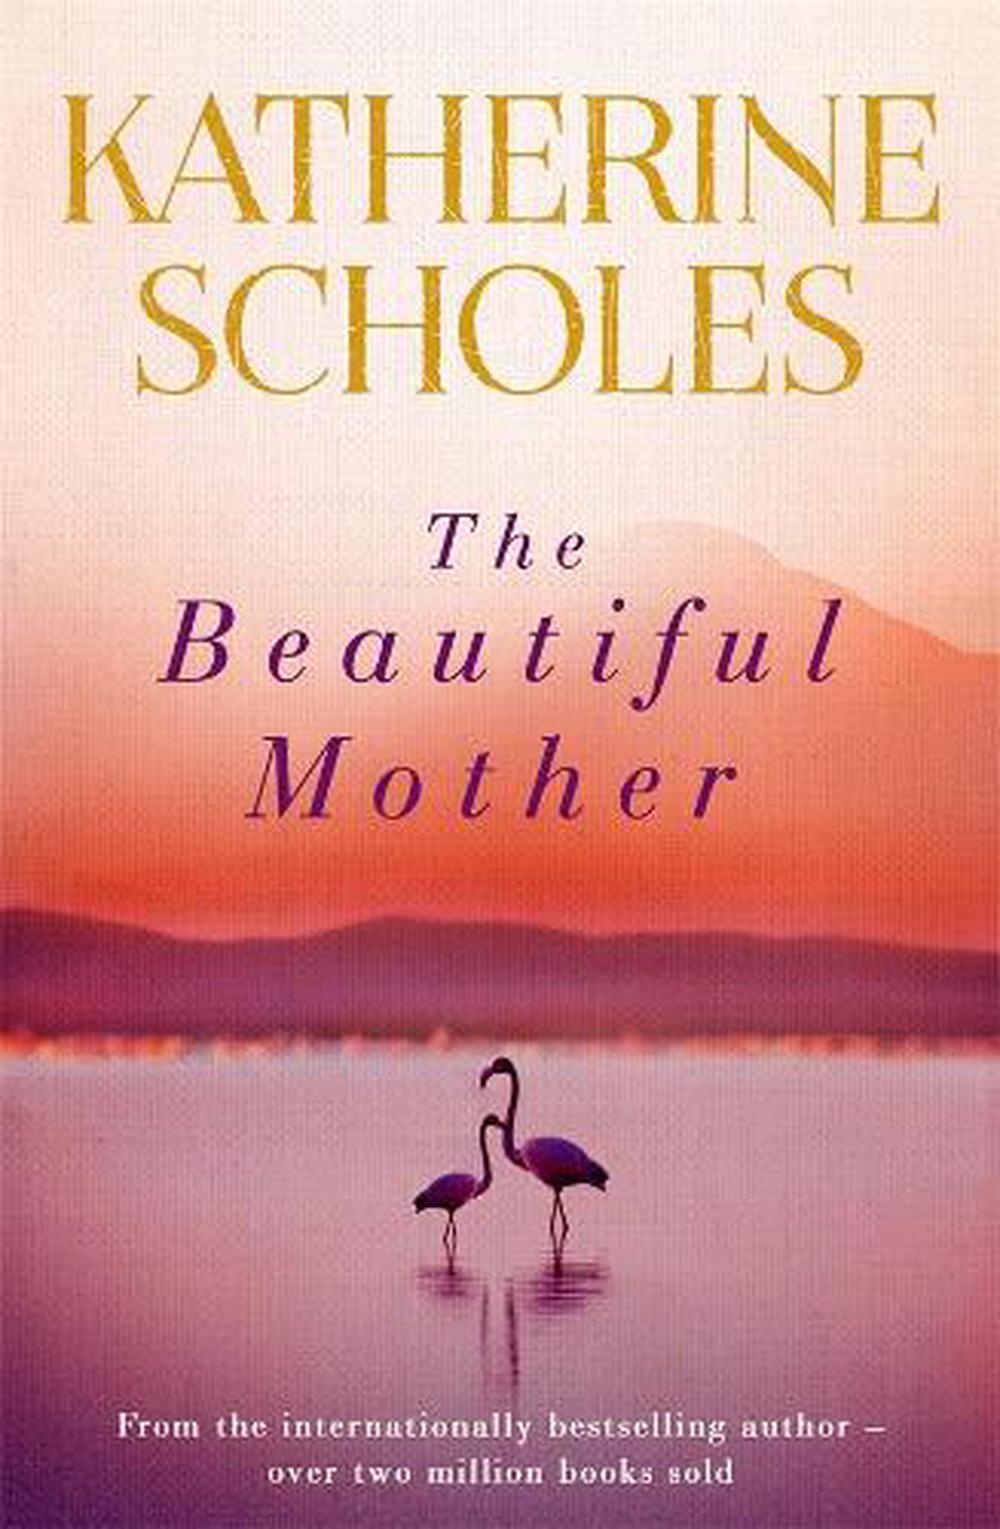 The Beautiful Mother by Katherine Scholes, Paperback, 9780143795346 ...